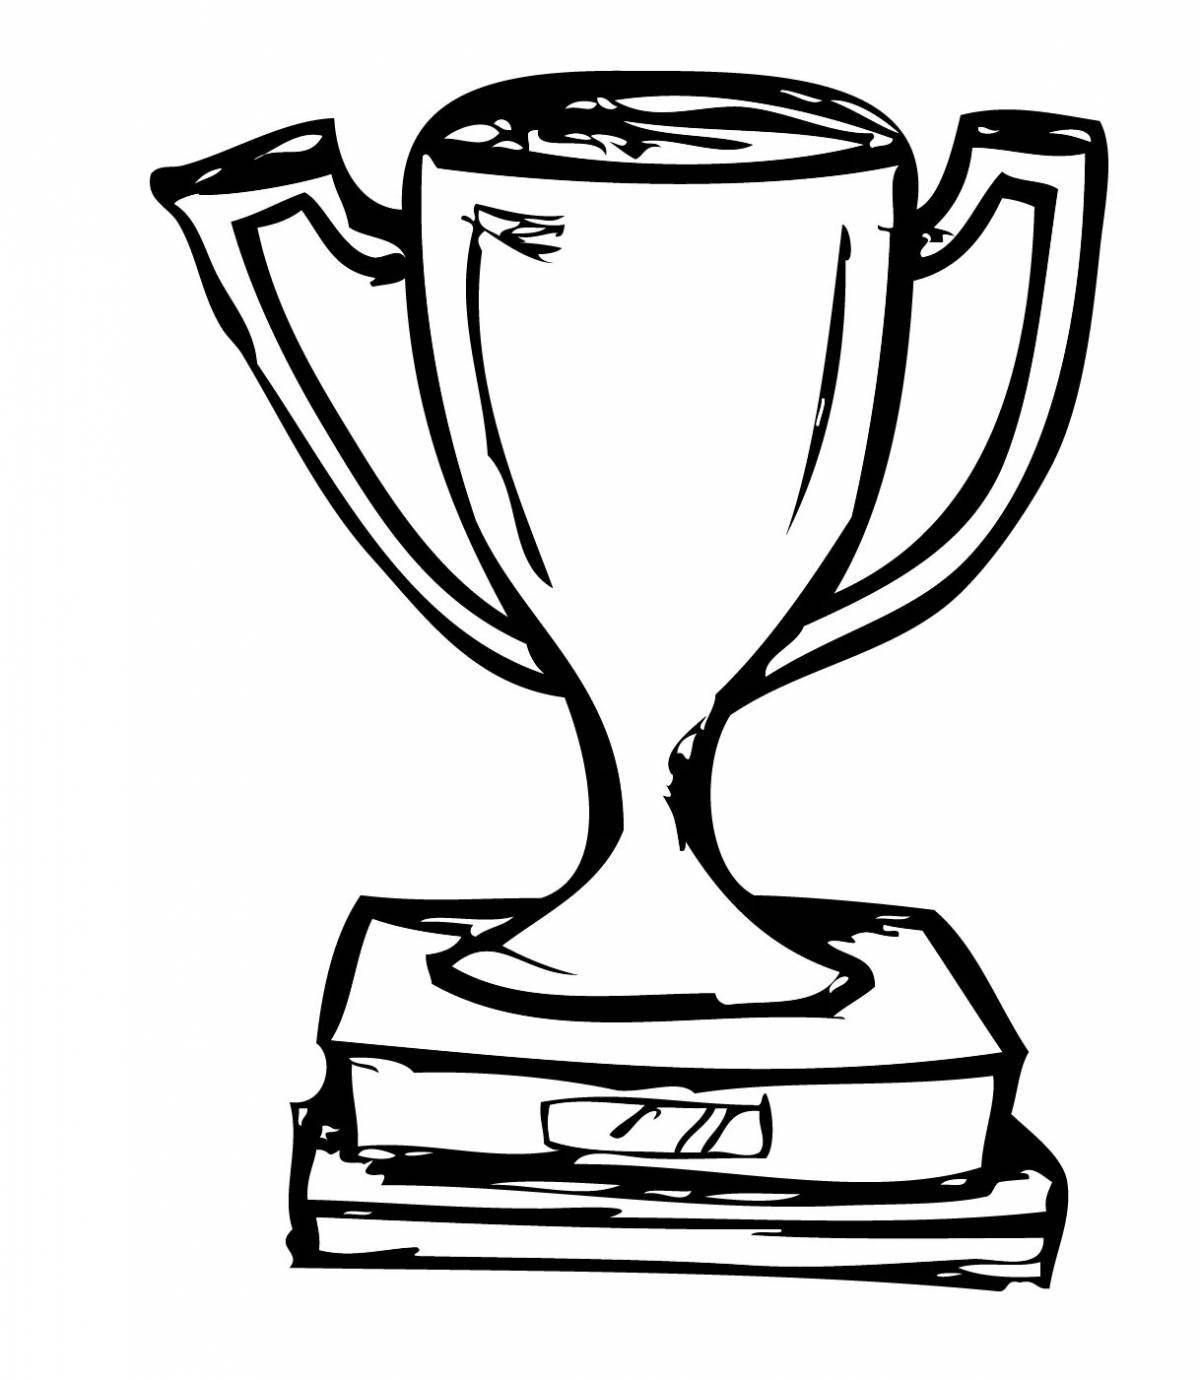 Coloring page glowing winner's cup